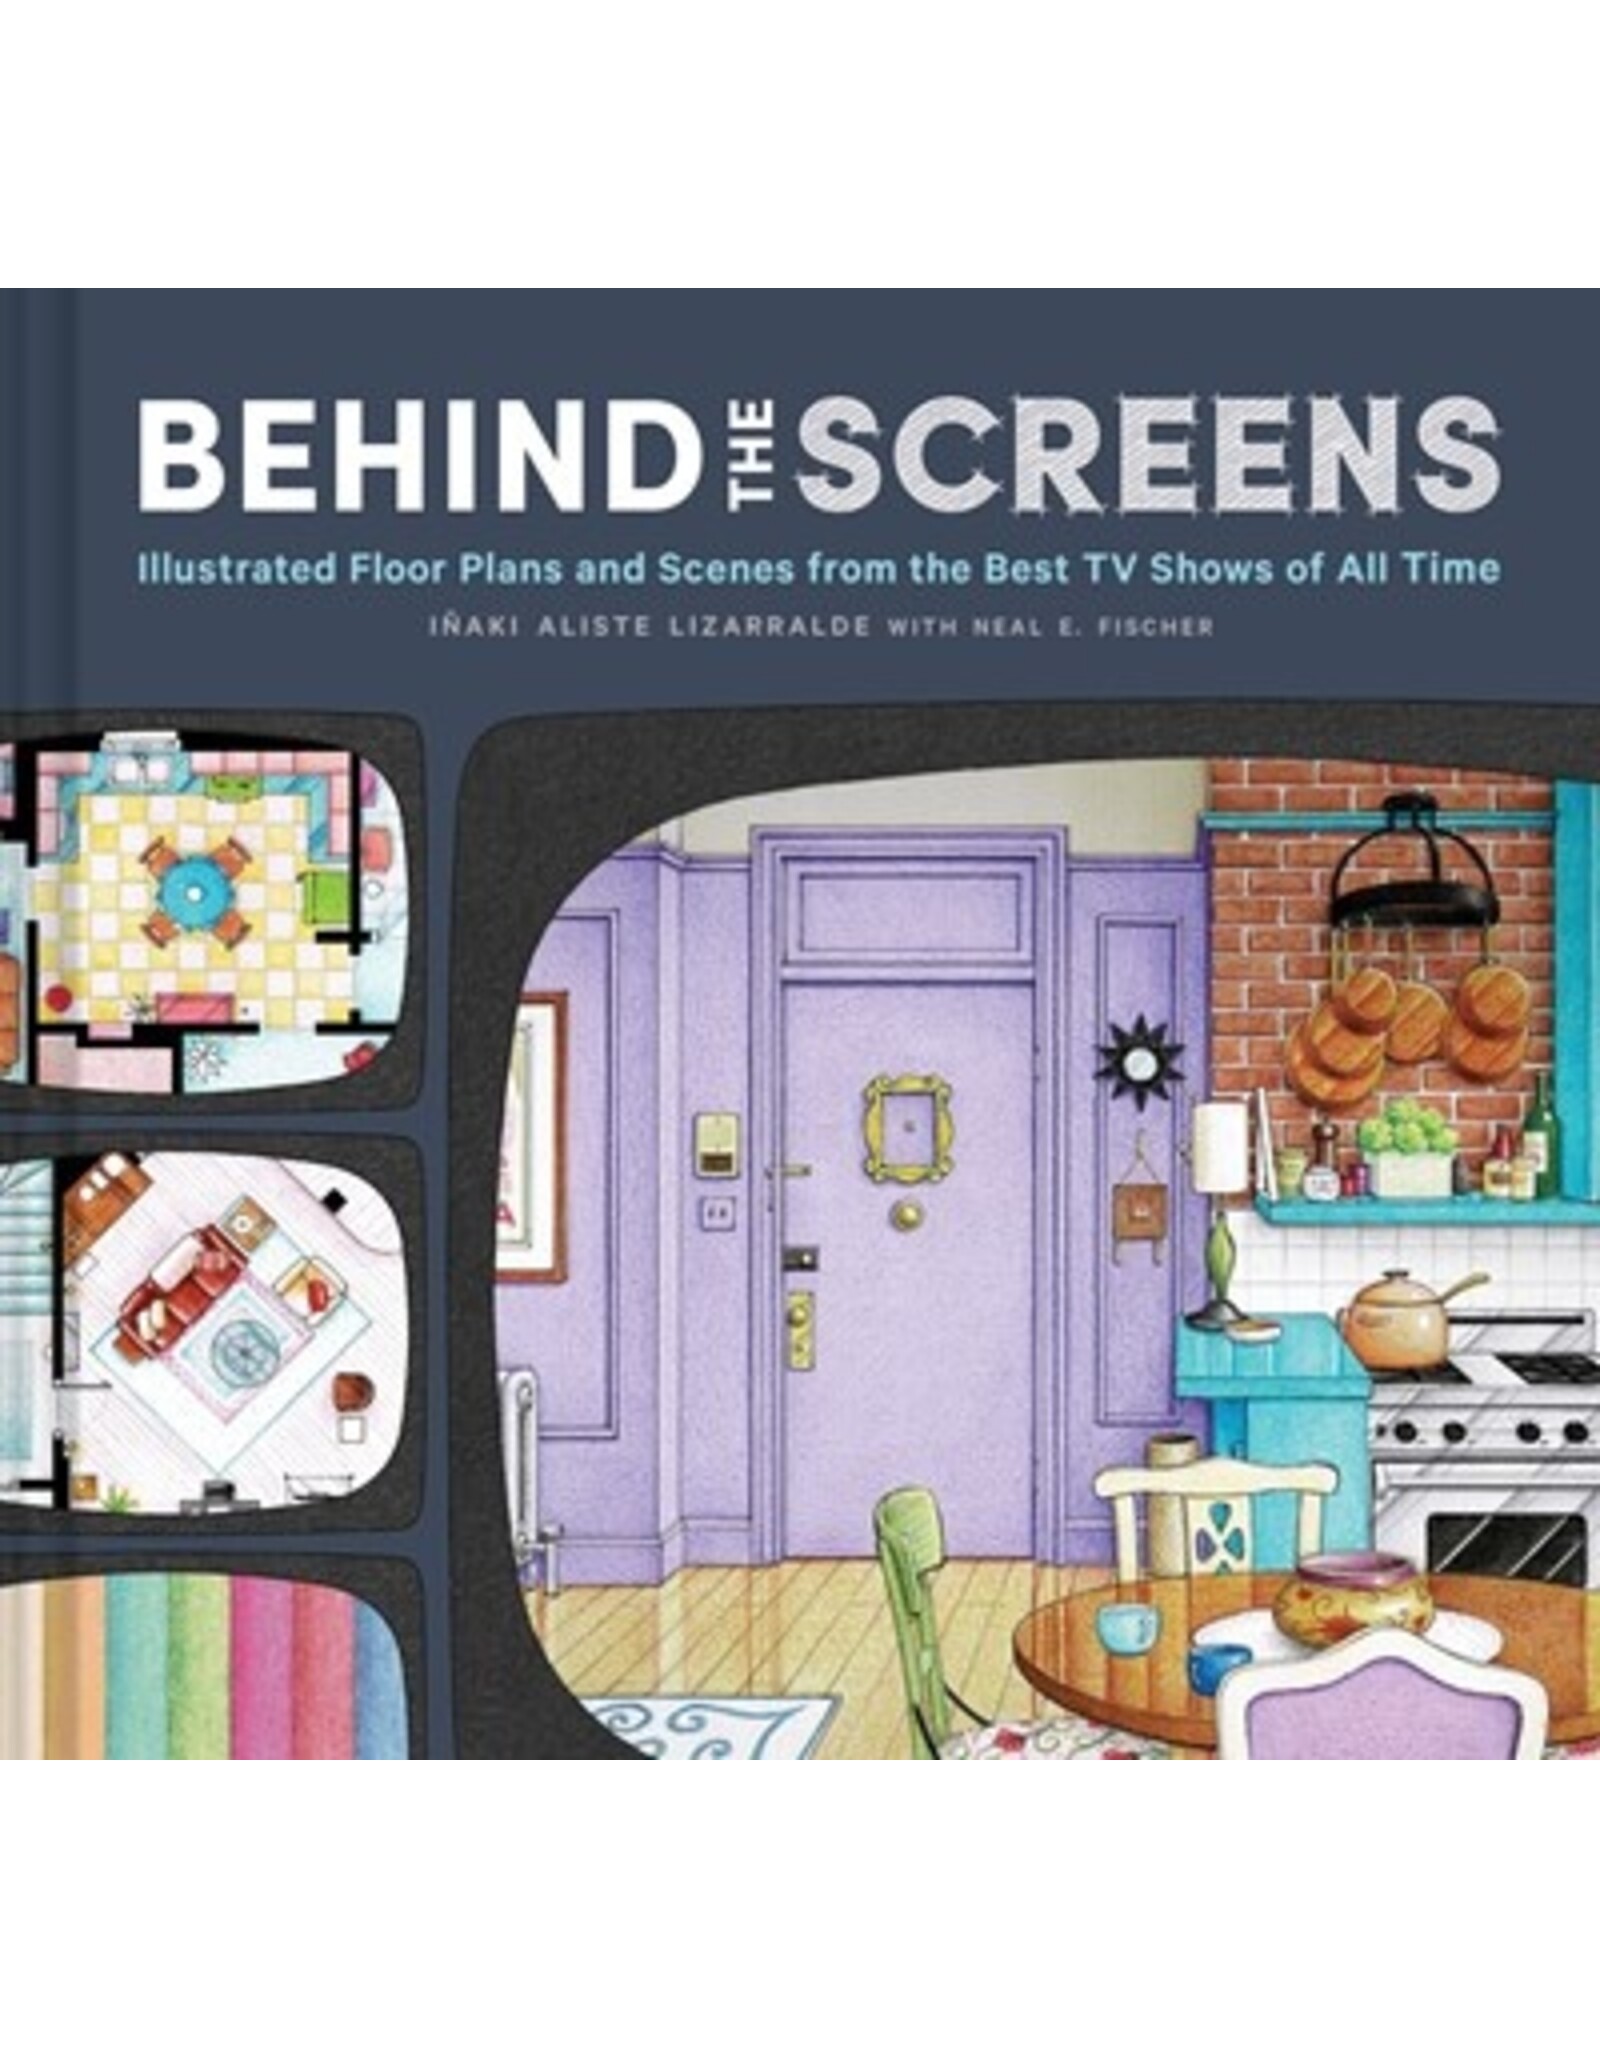 Books Behind the Screens : Illustrated Floor Plans and Scenes from the Best TV Shows of All Time  Iñaki Aliste Lizarralde (Illustrated by), Neal E. Fischer (Text by)